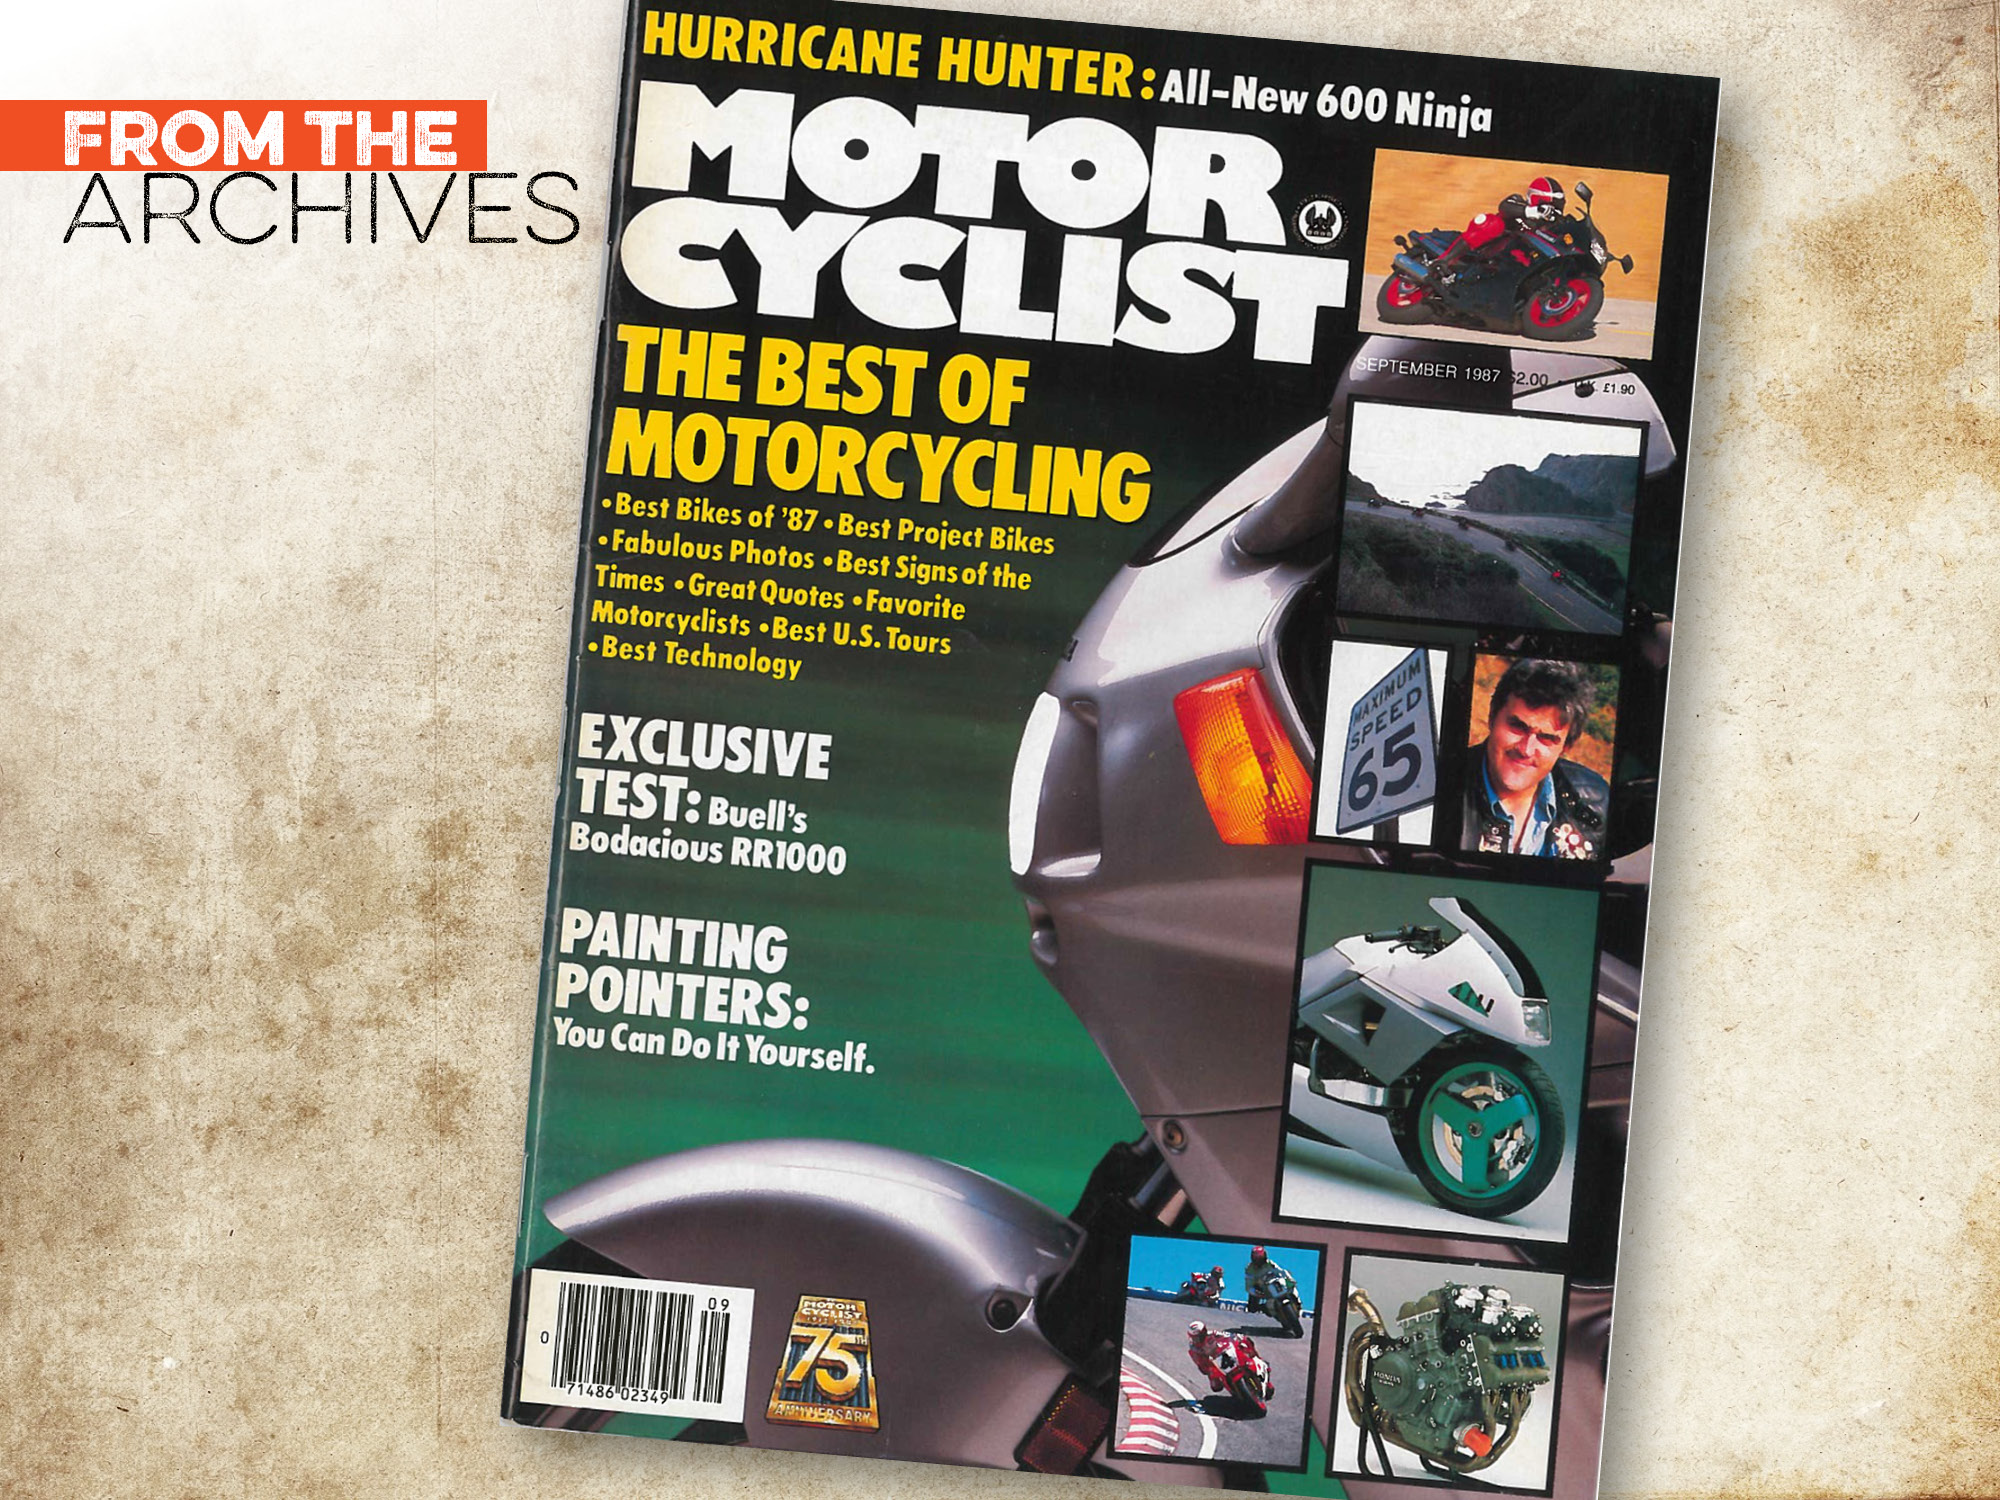 Motorcyclist Archives 1987: Best of Motorcycles, Best Tours 